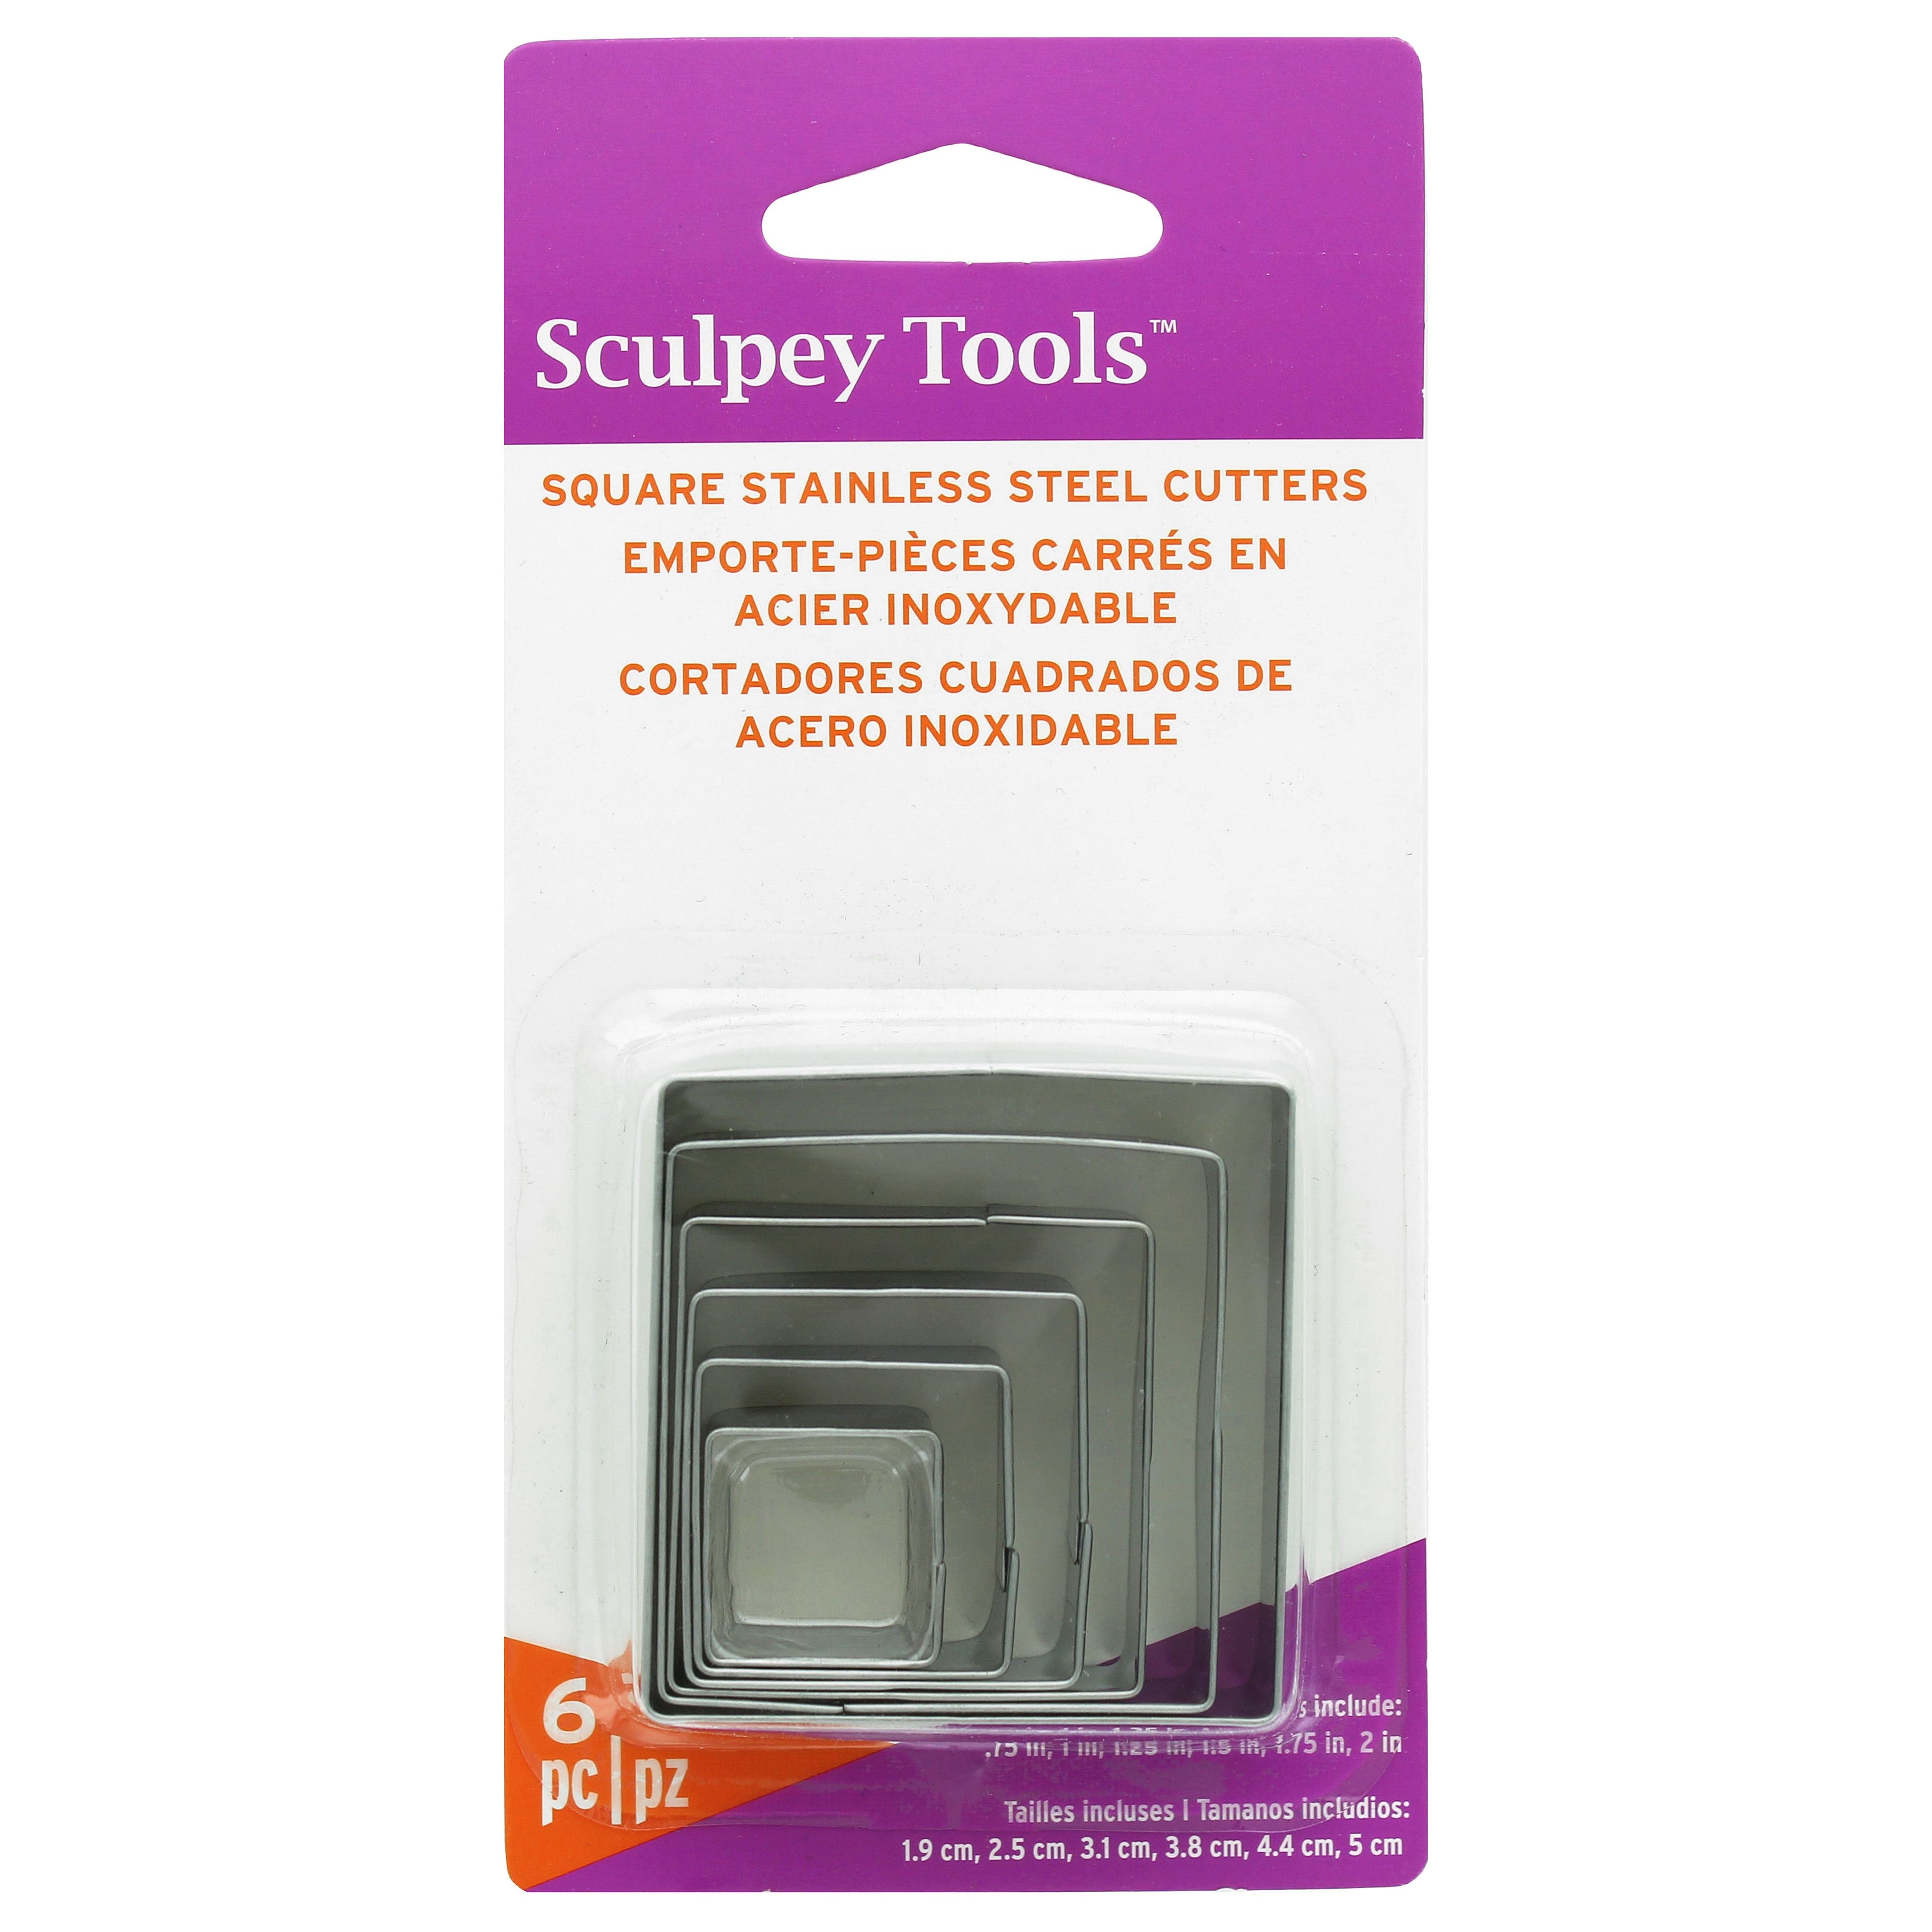 Sculpey Tools™ Square Stainless Steel Cutters